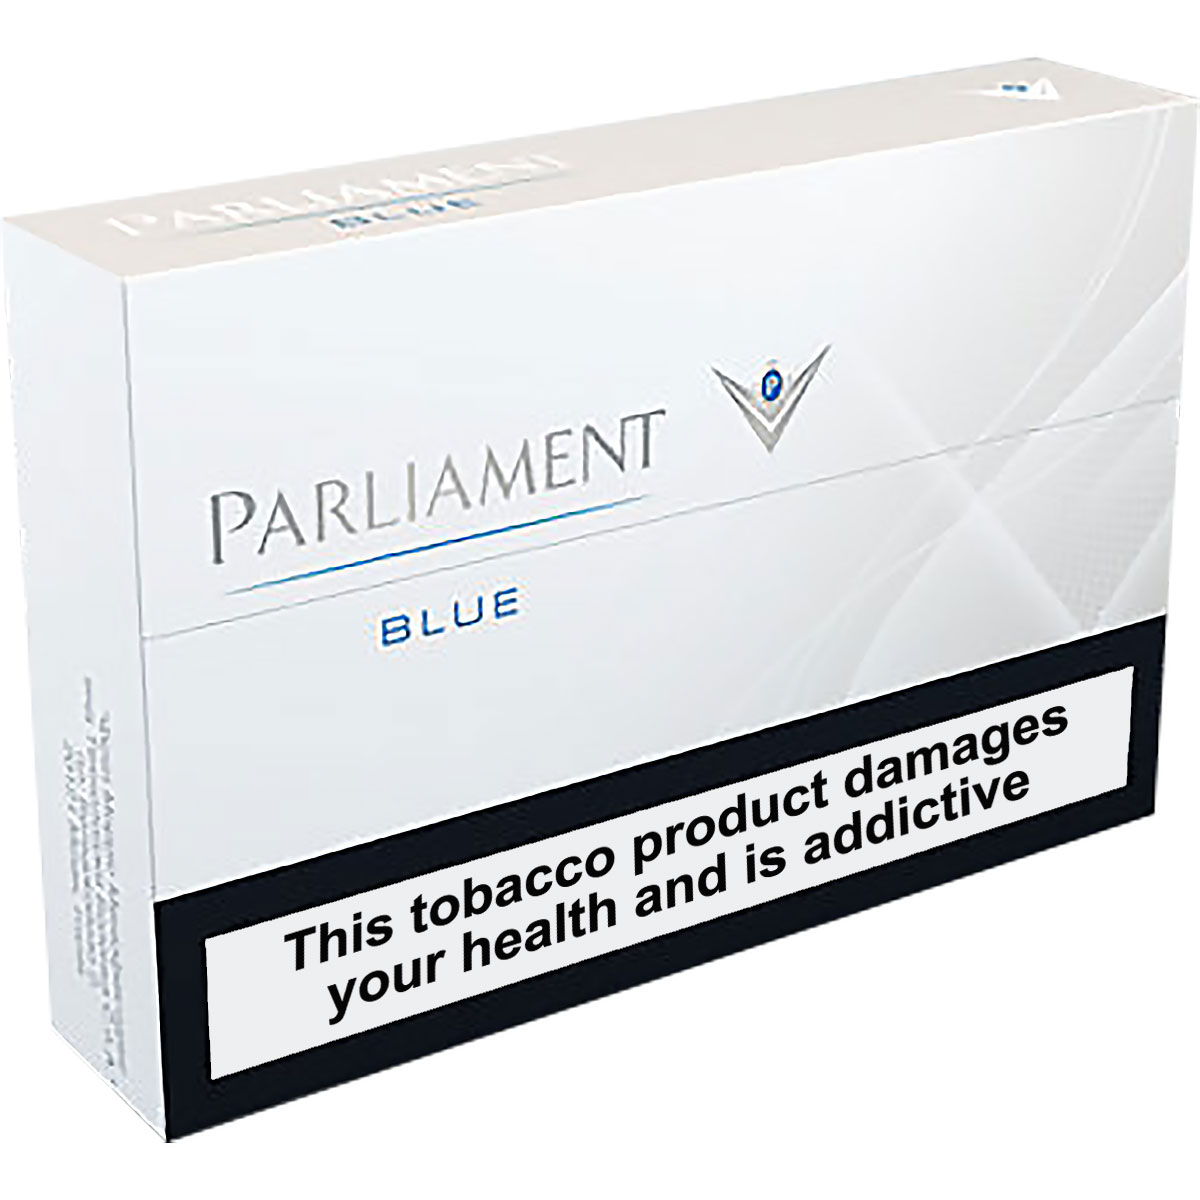 Parliament - Blue Limited Edition (1 pack)